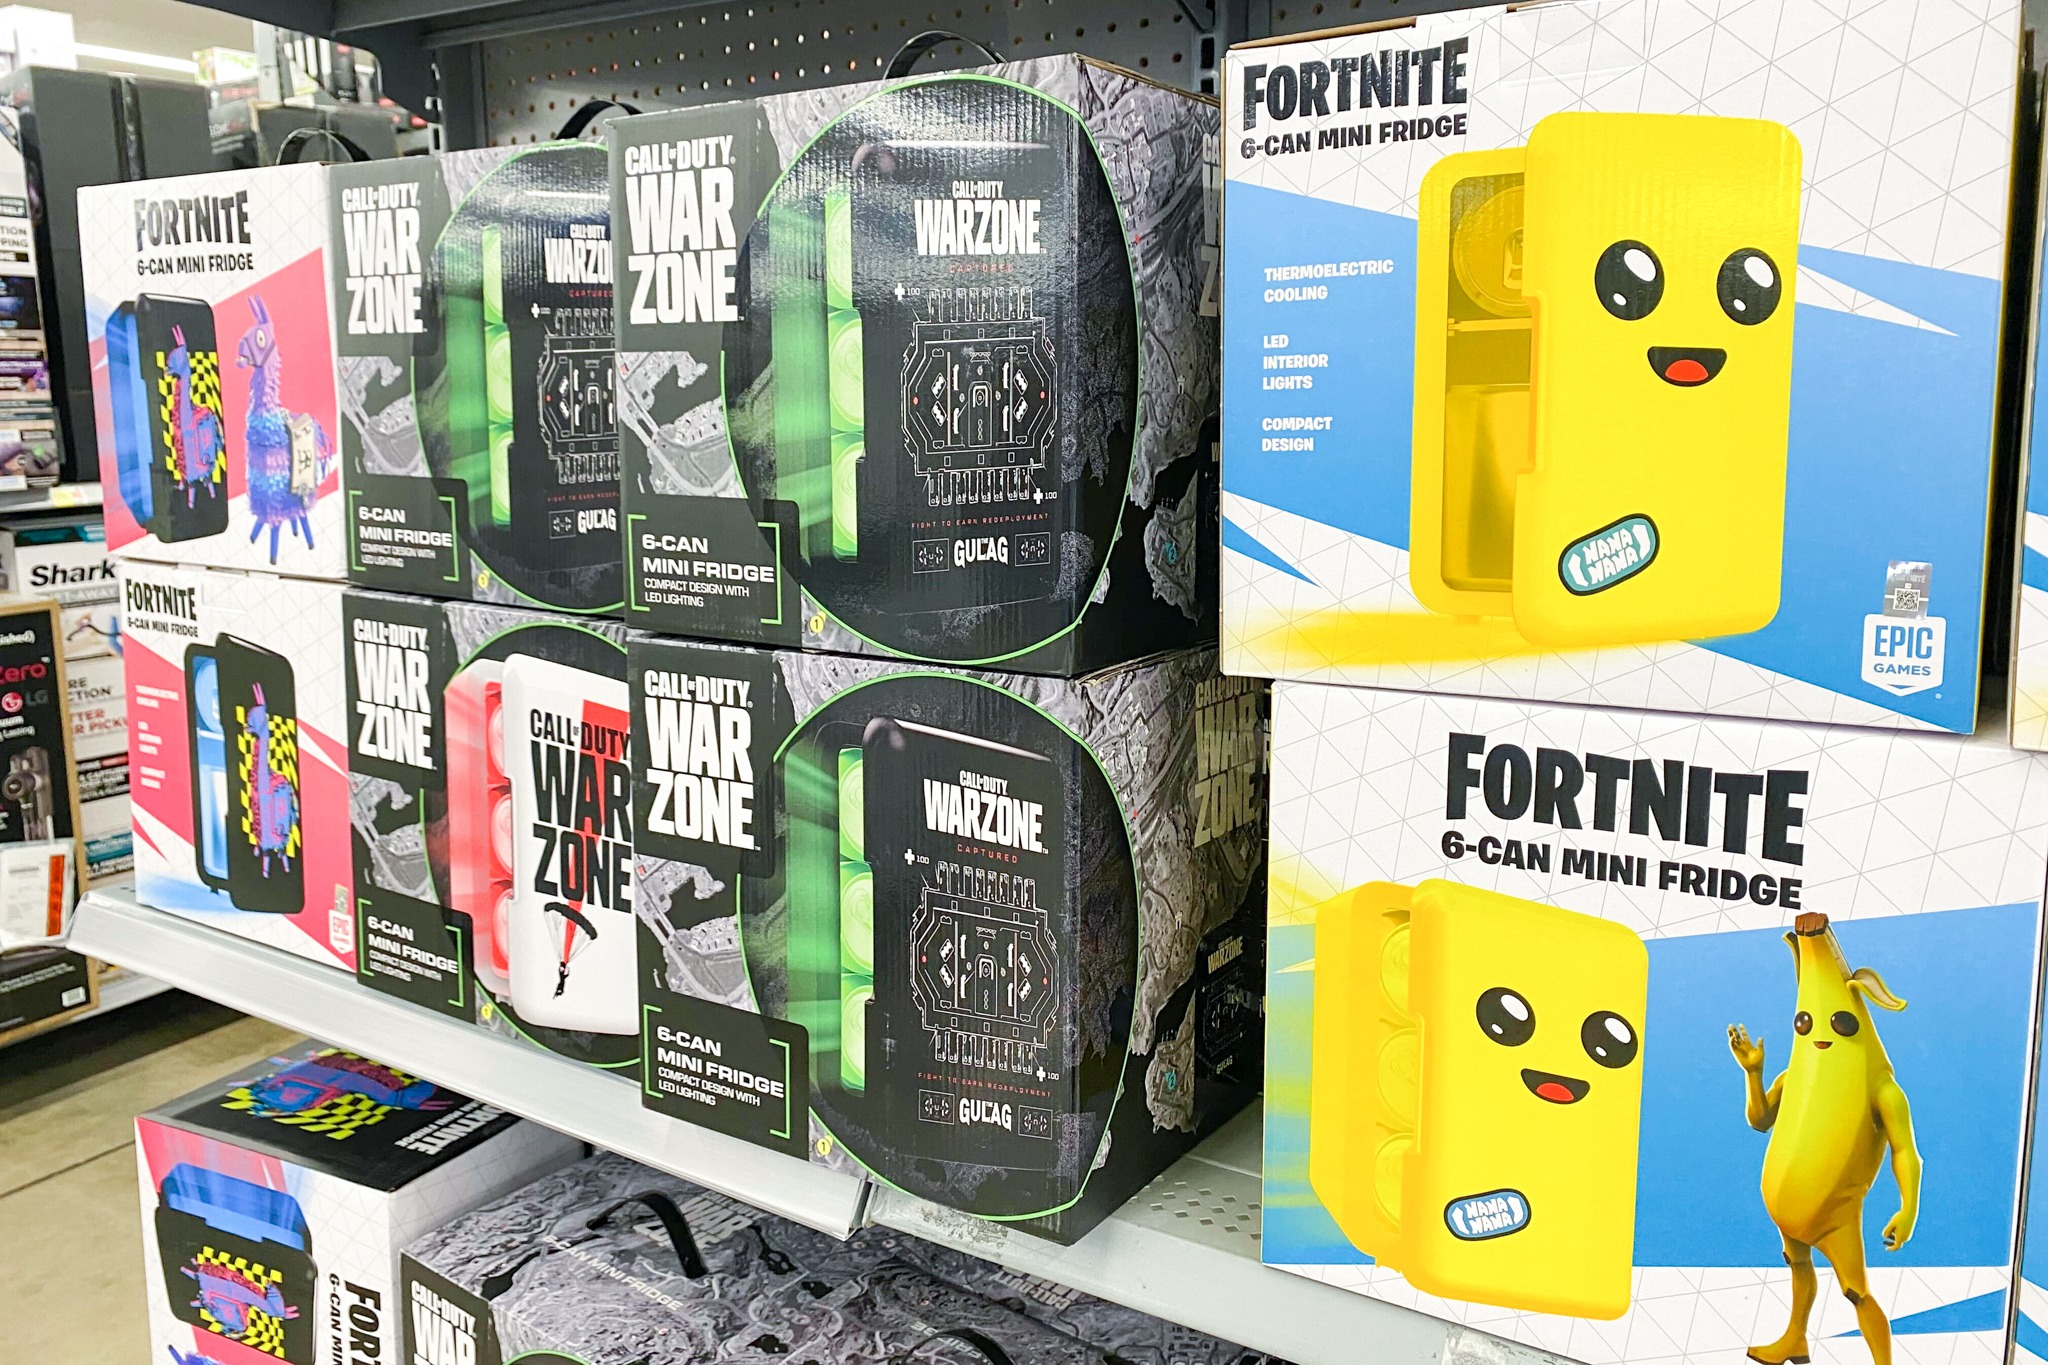 Clearancequeen👑 on Instagram: 🔥 $25.88 Fortnite Peely 6 Can Mini Fridge  . 🚨MORE DEALS POSTED ON TELEGR@M🚨 . 💥Link in bio Under “HOT DE@LS” 💥  Follow my Telegram (Link in b!o) .